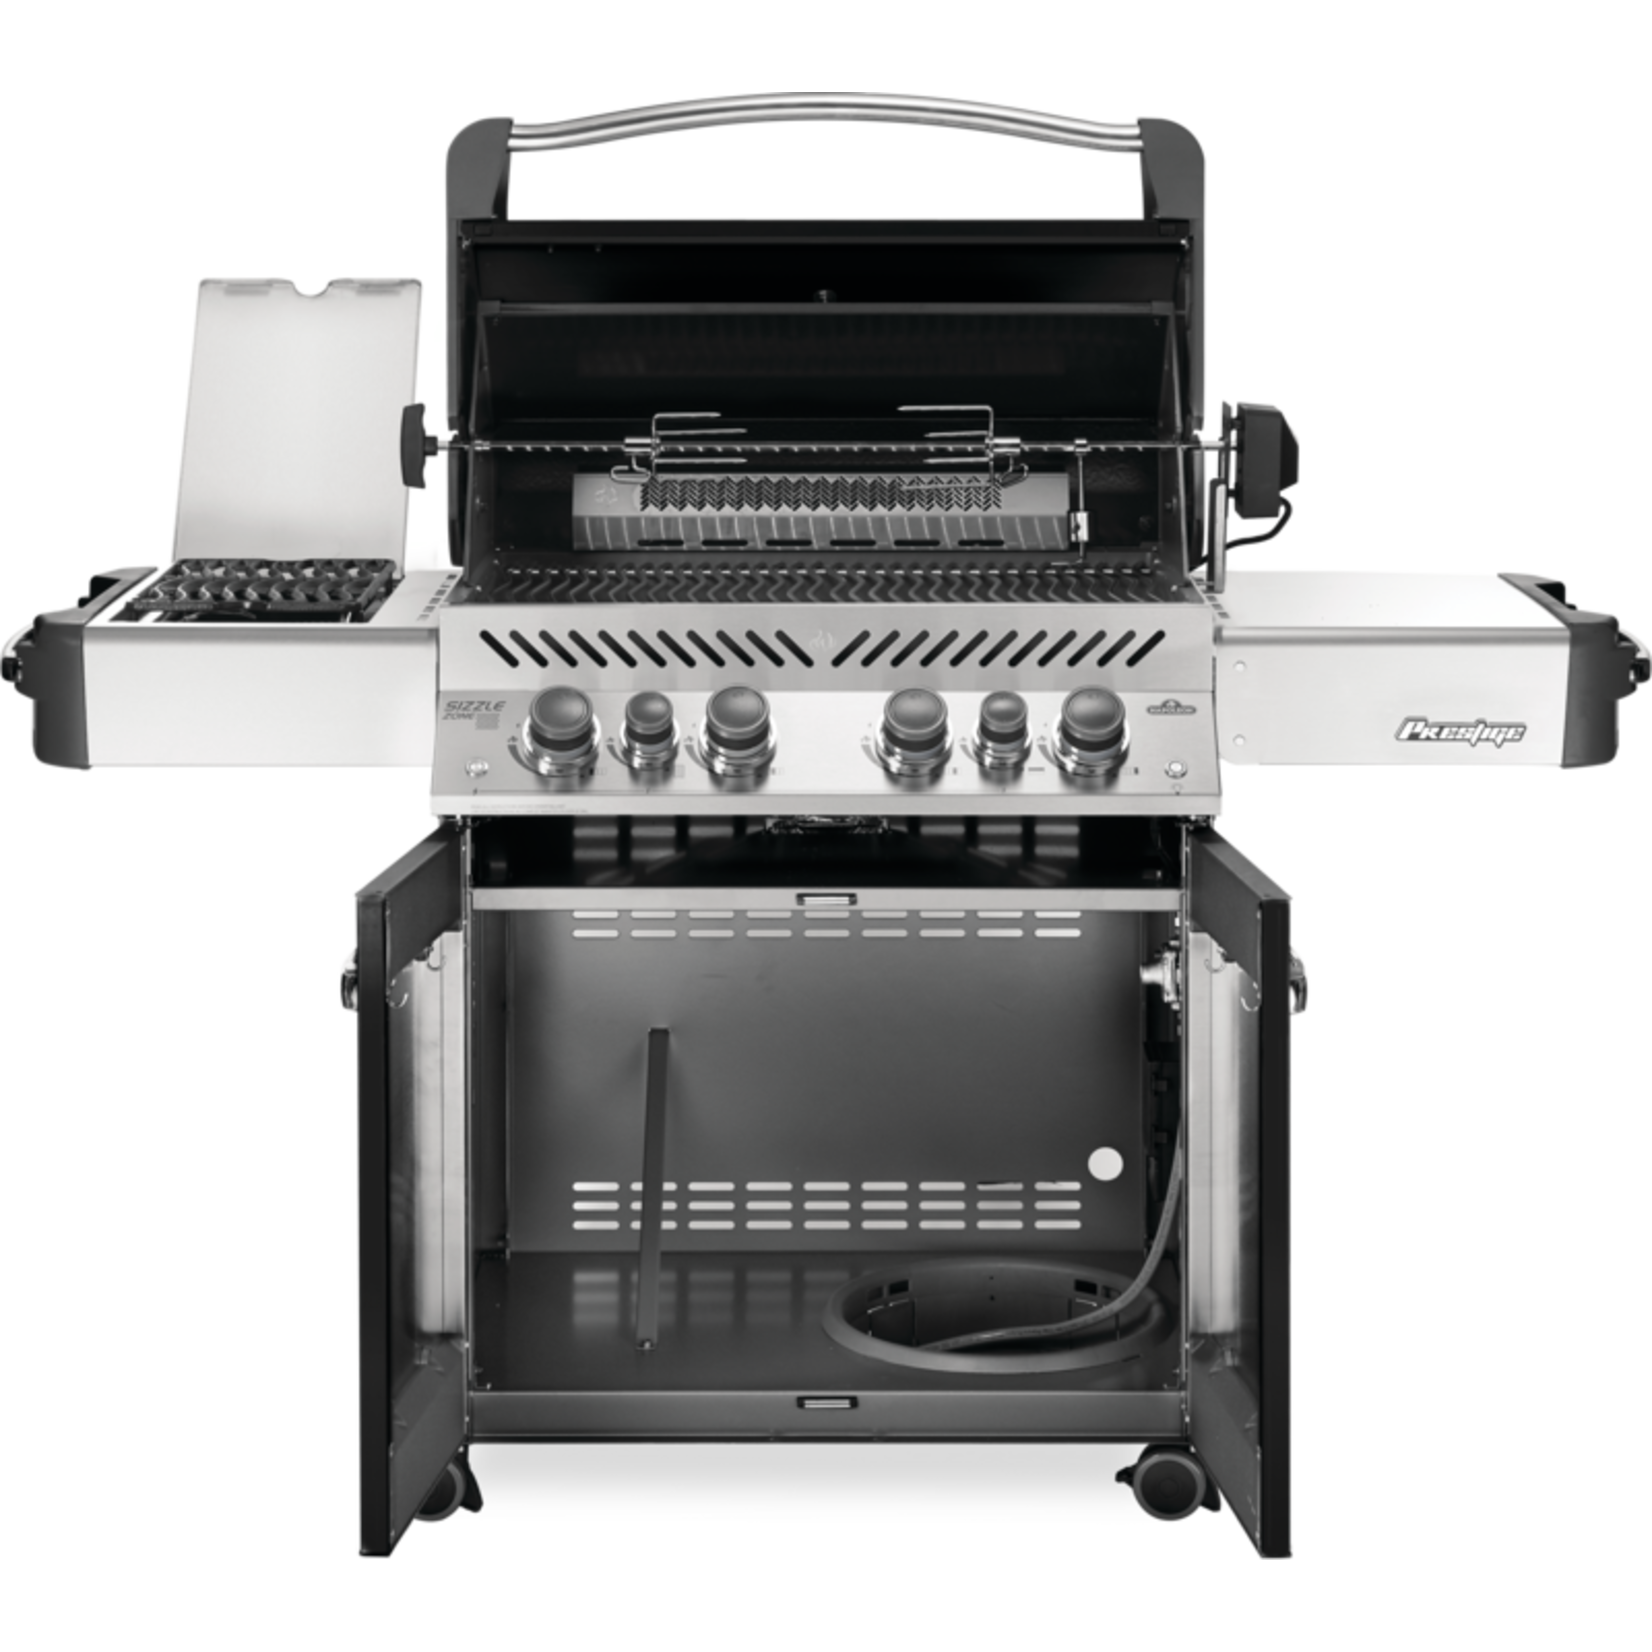 Napoleon Prestige® 500 Propane Gas Grill with Infrared Side and Rear Burners, Black